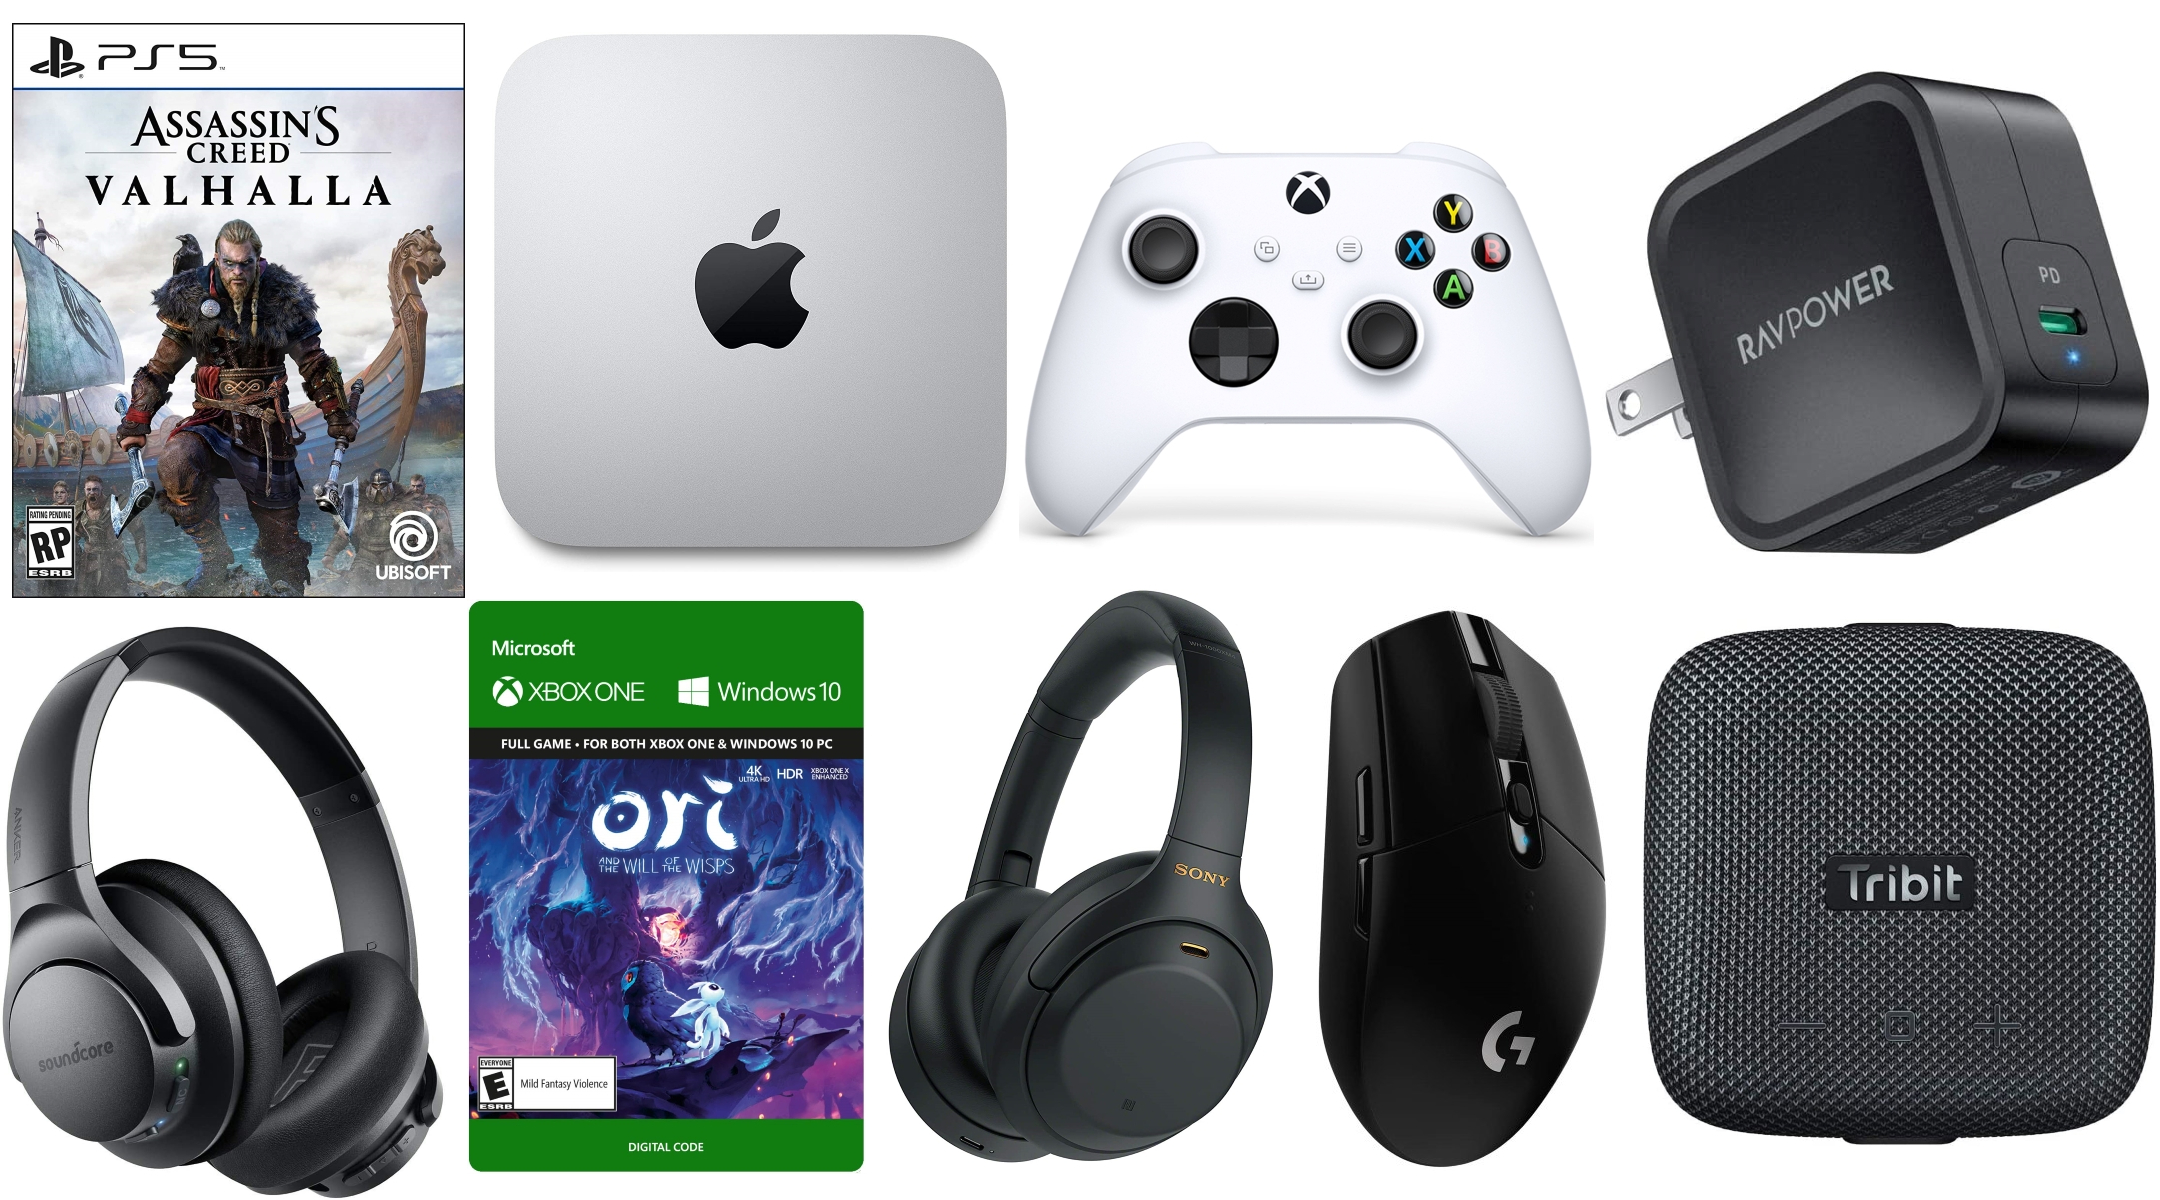 emulator for mac mini with xbox controller support